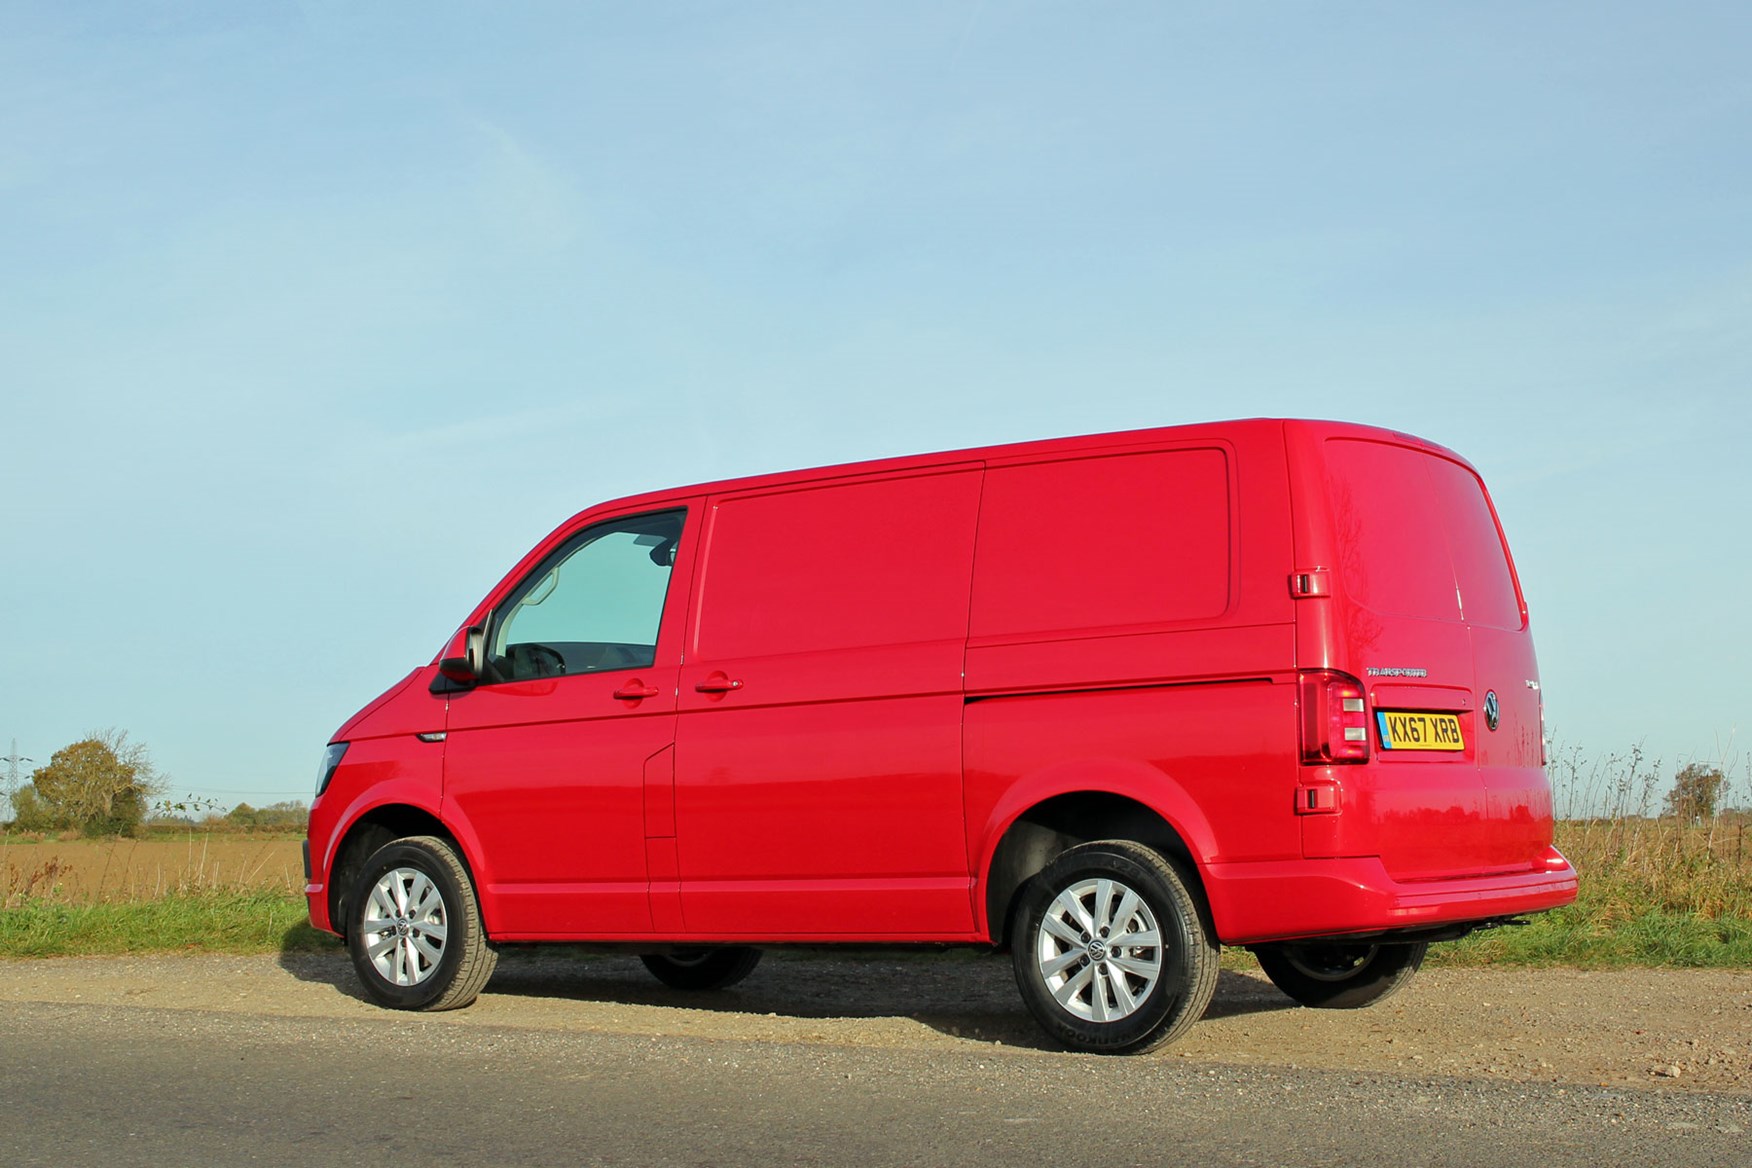 VW Transporter T6 TSI 150 review - rear view, red